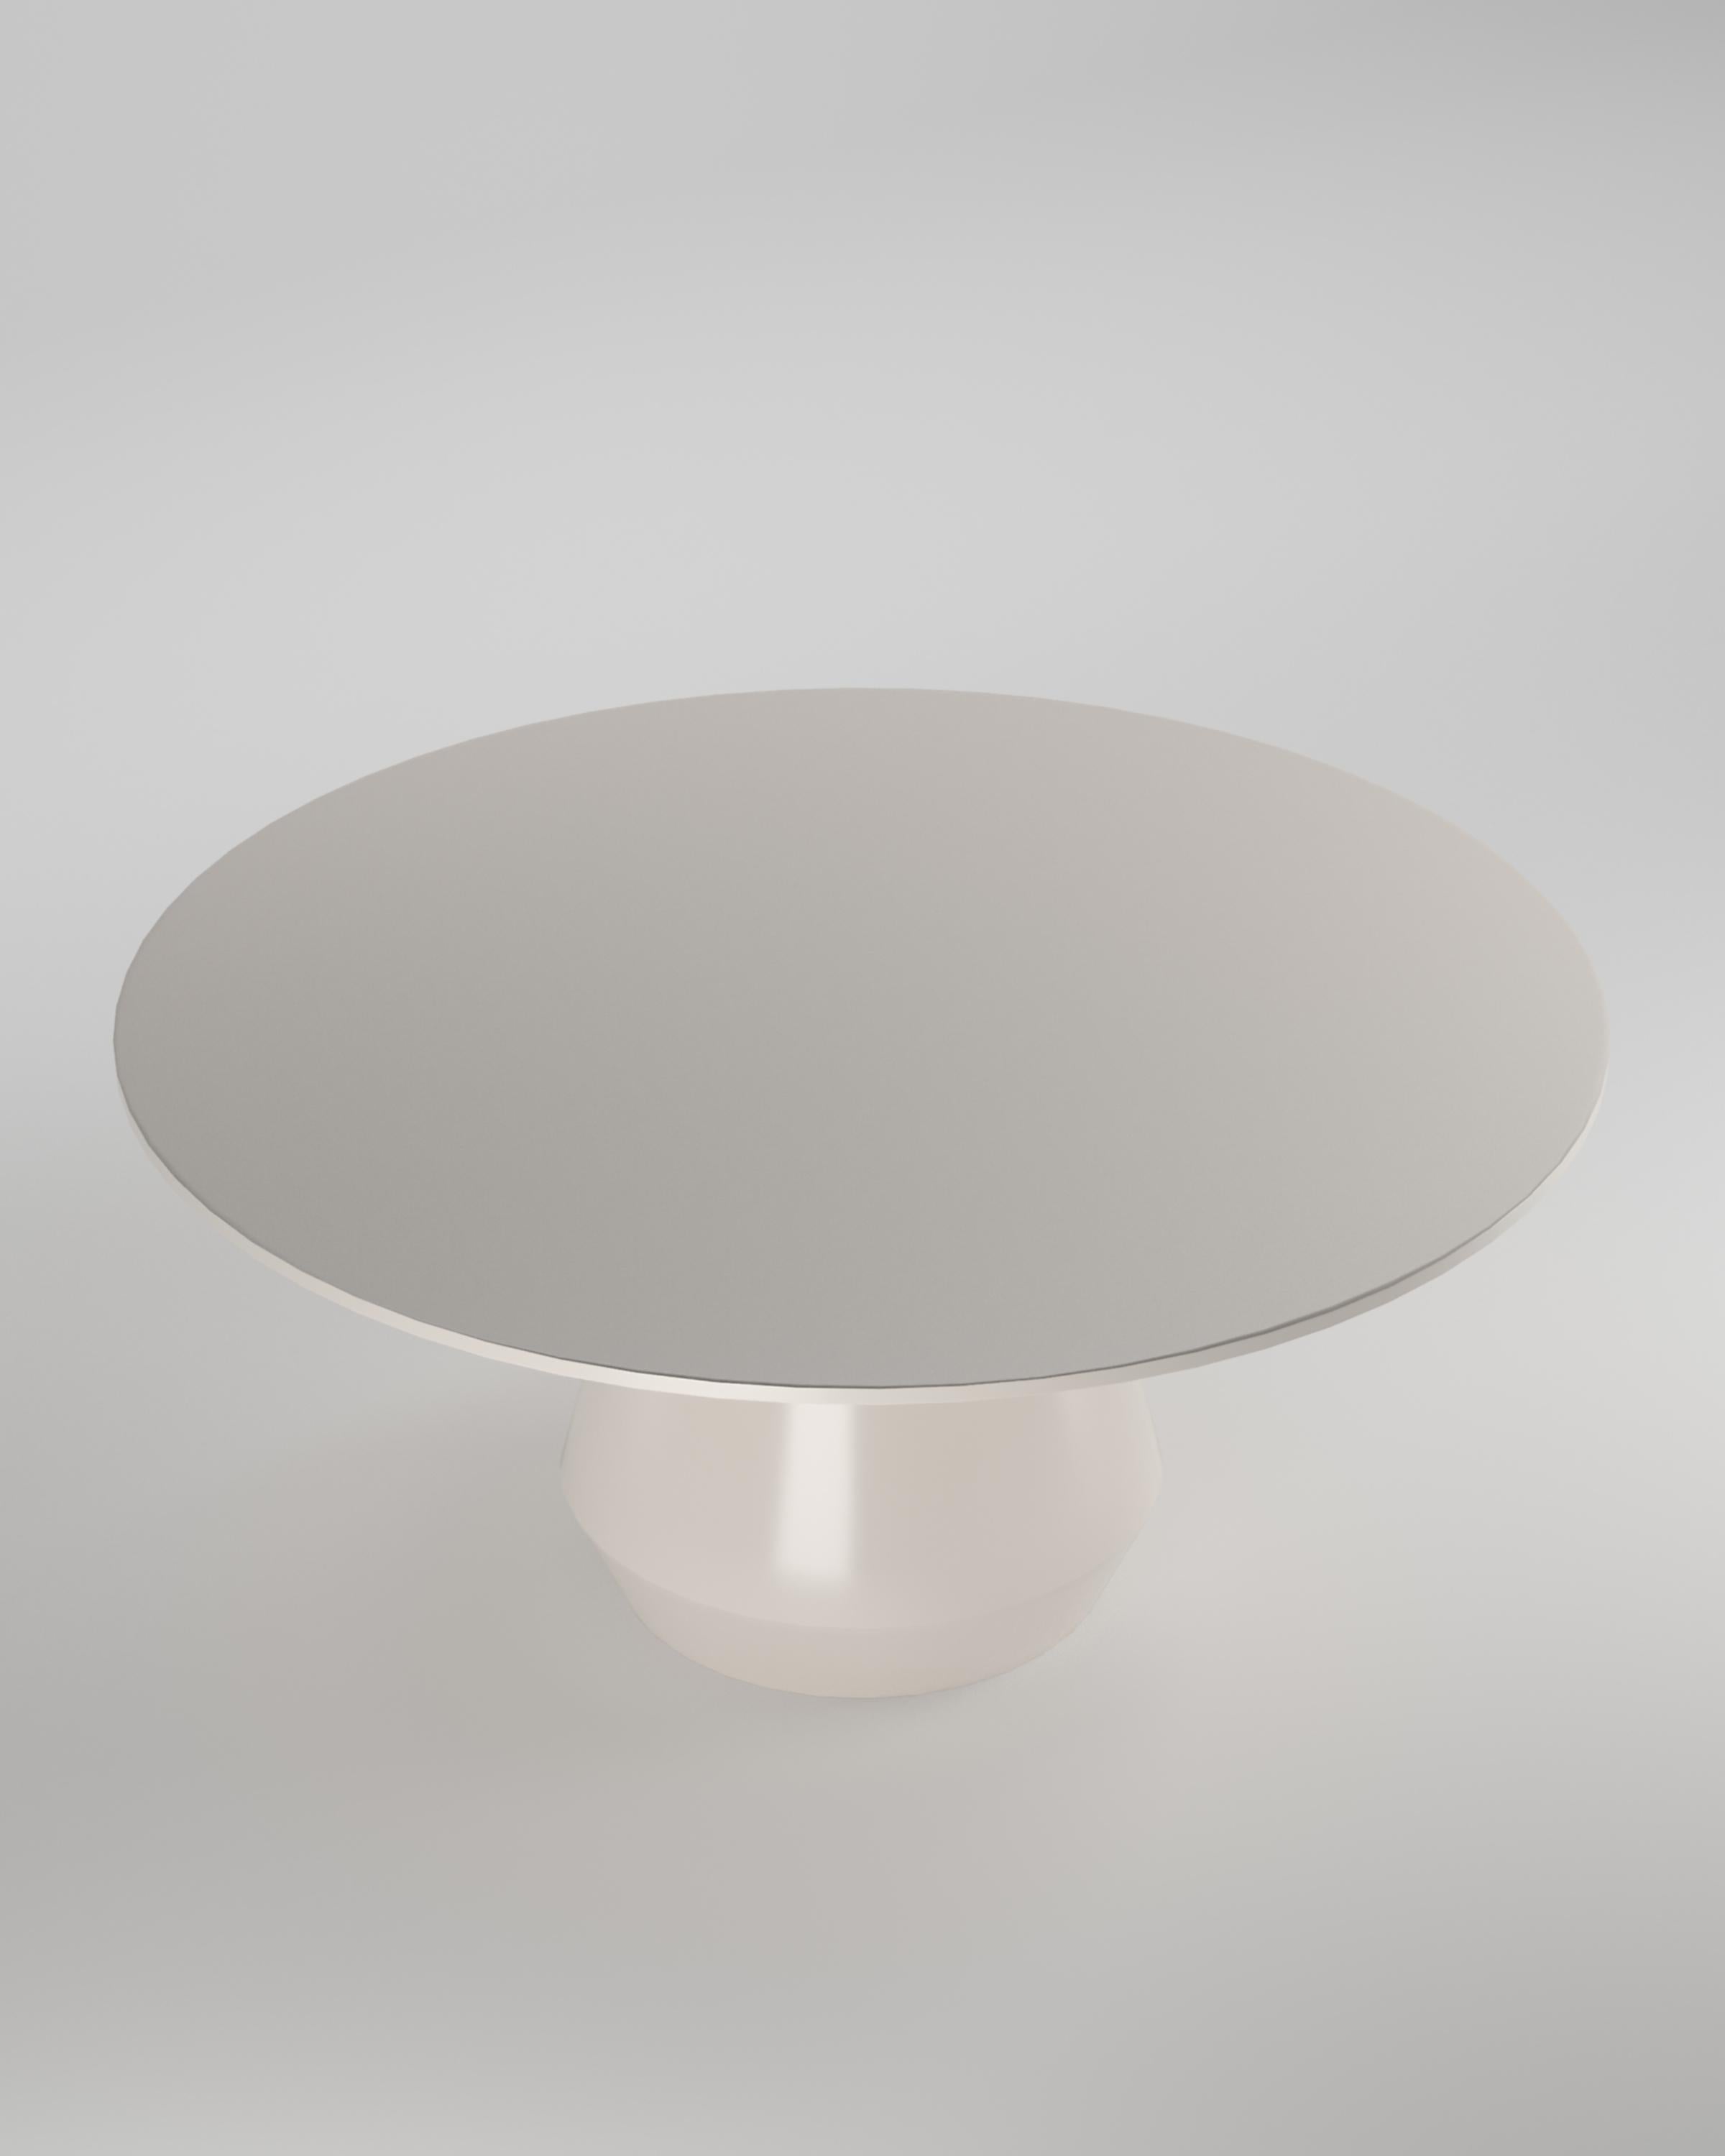 Portuguese Contemporary Modern Charlotte Dining Table in Lacquer in White by Collector For Sale